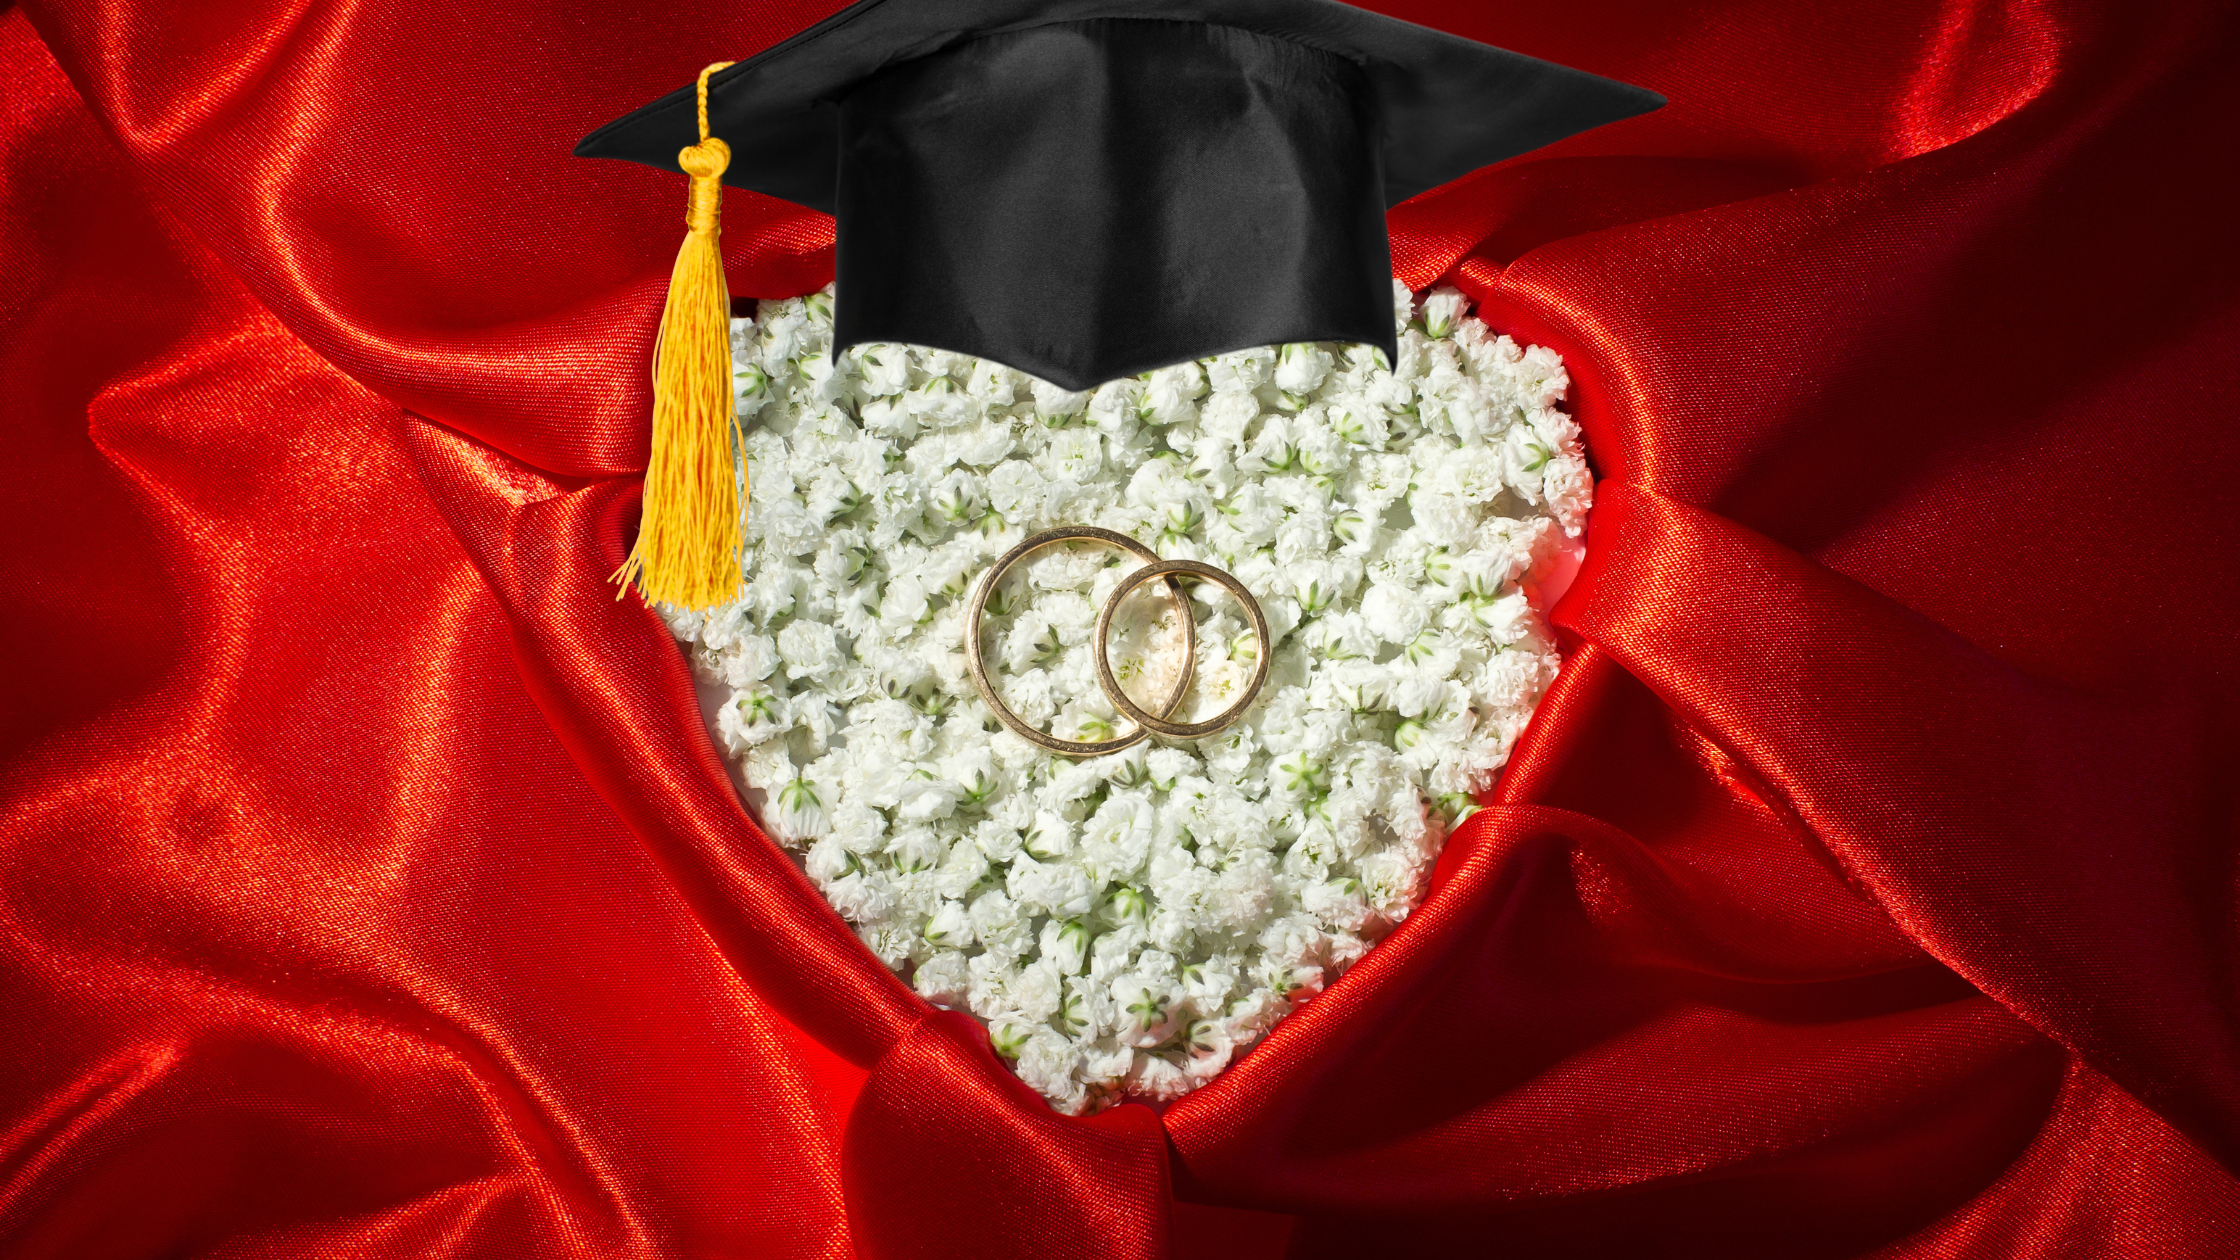 Is it okay to propose at graduation